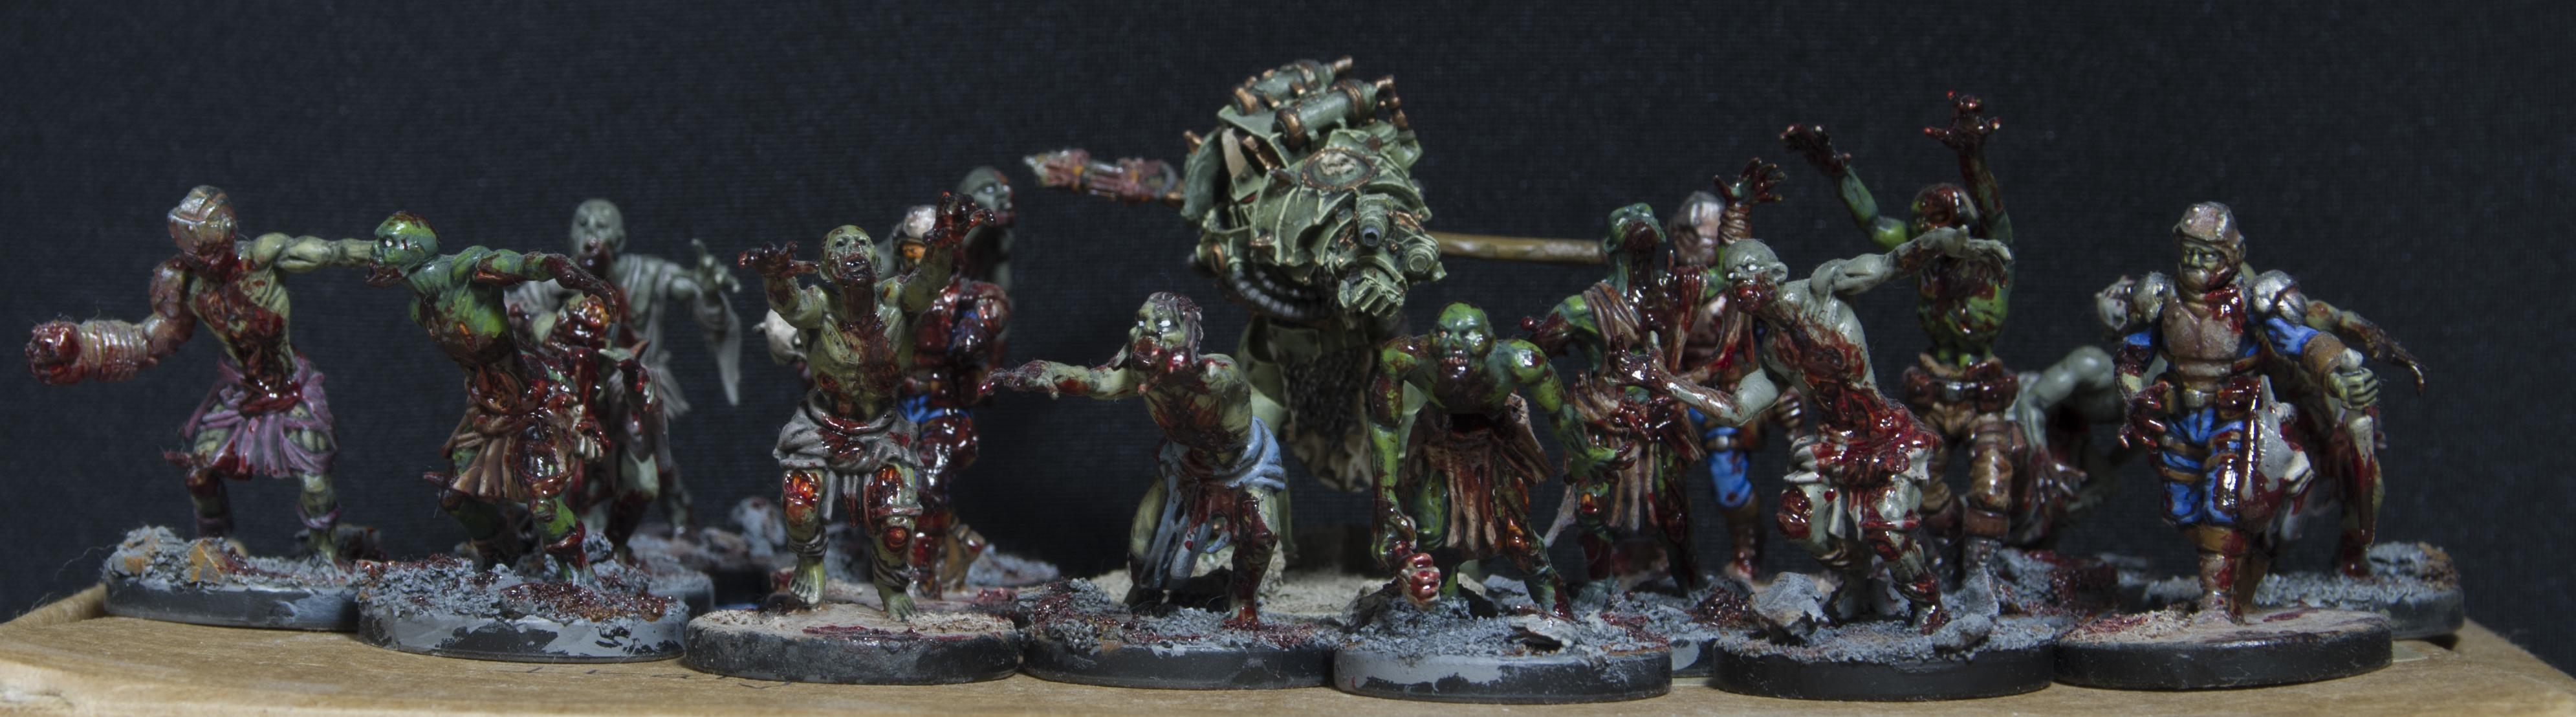 Blight, Blight Drone, Chaos, Chaos Space Marines, Daemons, Drone, Flyer, Forge World, Nurgle, Plague, Prince, Space, Space Marines, Warhammer 40,000, Warhammer Fantasy, Wh40